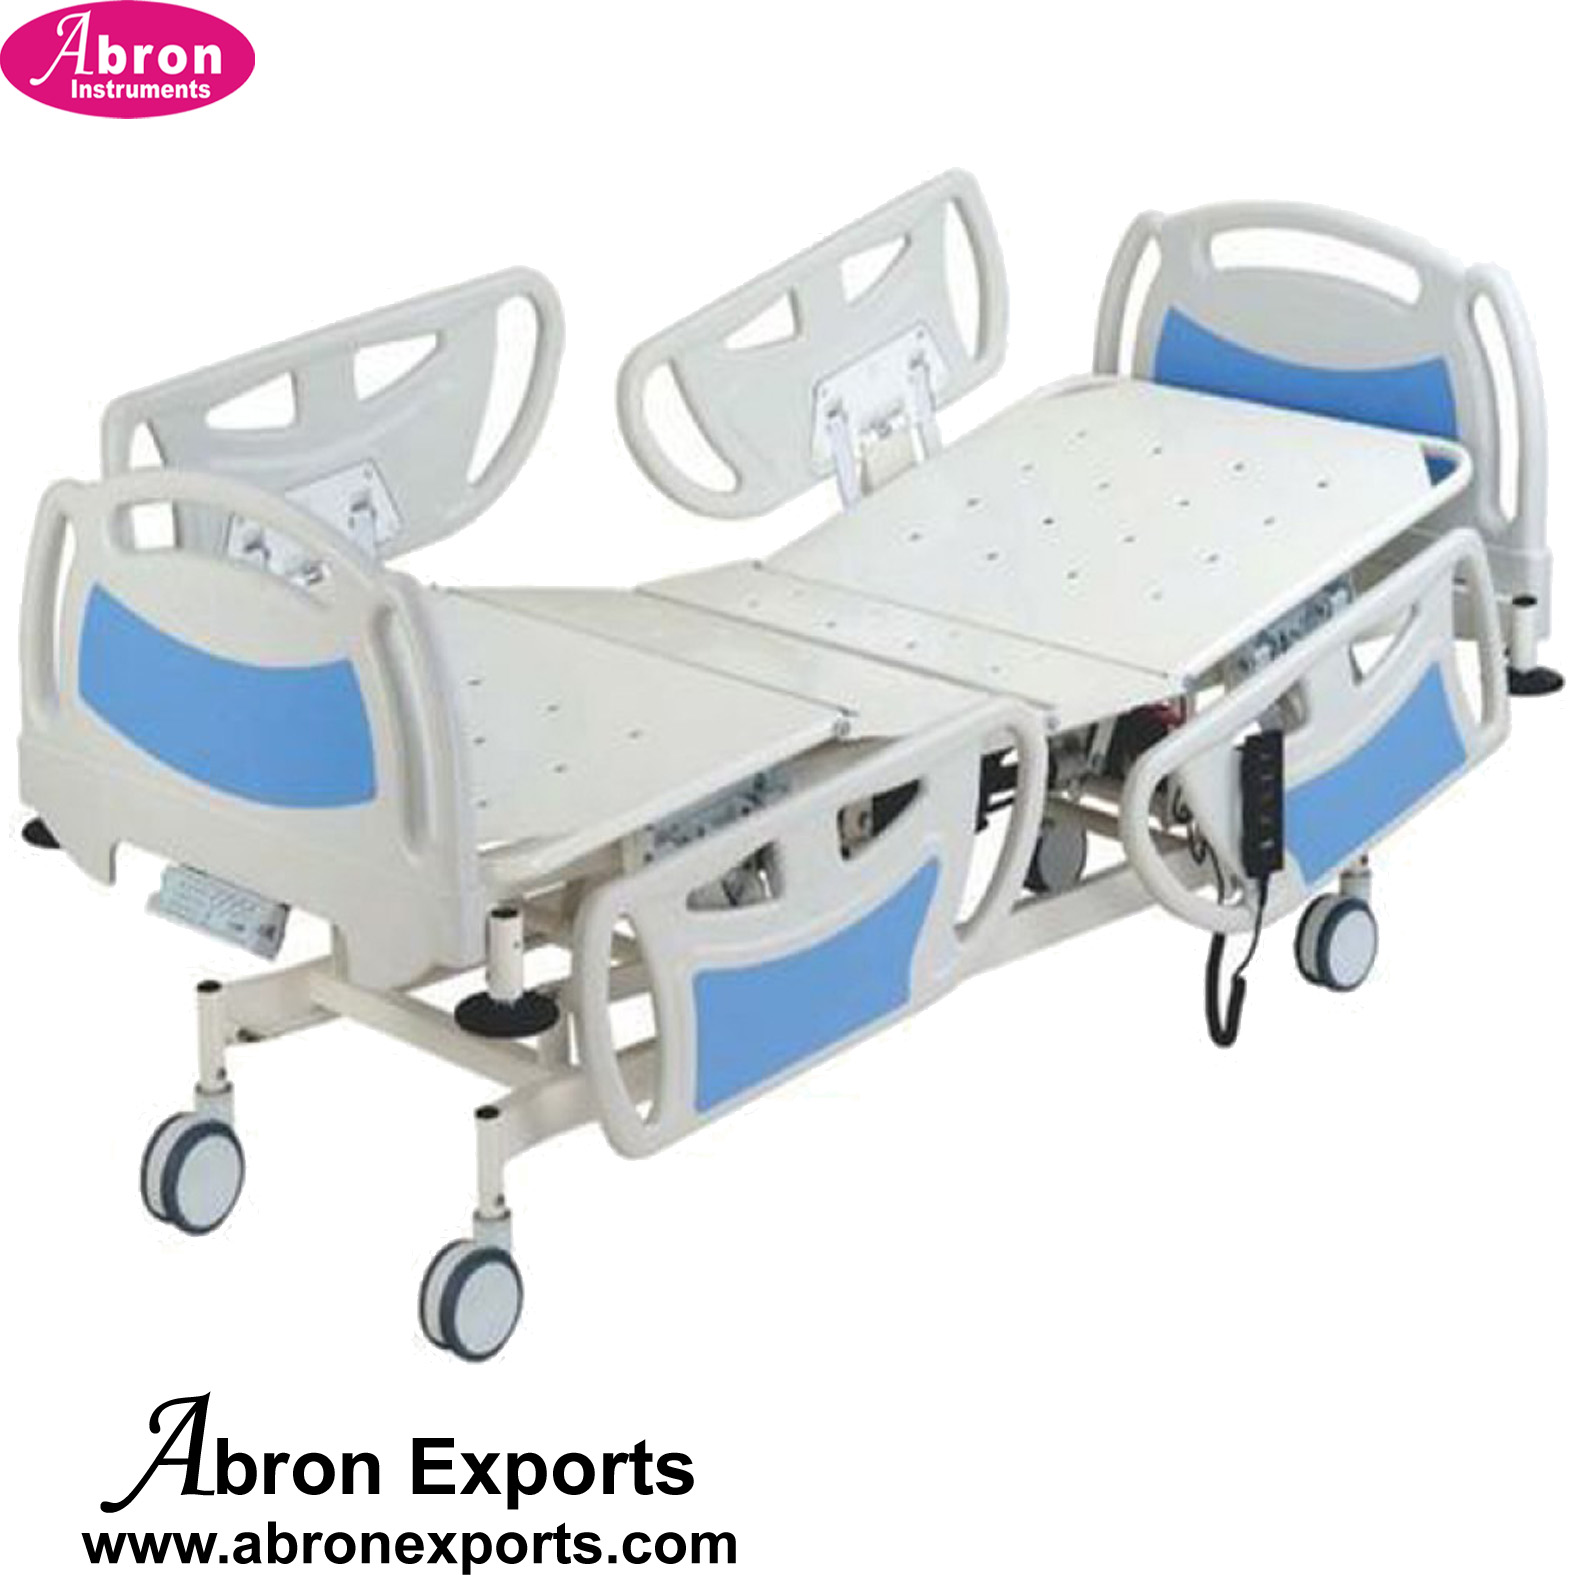 Patient Stretcher ICU Bed Electric Semi Fowler 3 Functions Motorized Hospital Furniture Abron ABM-2261SF3M 